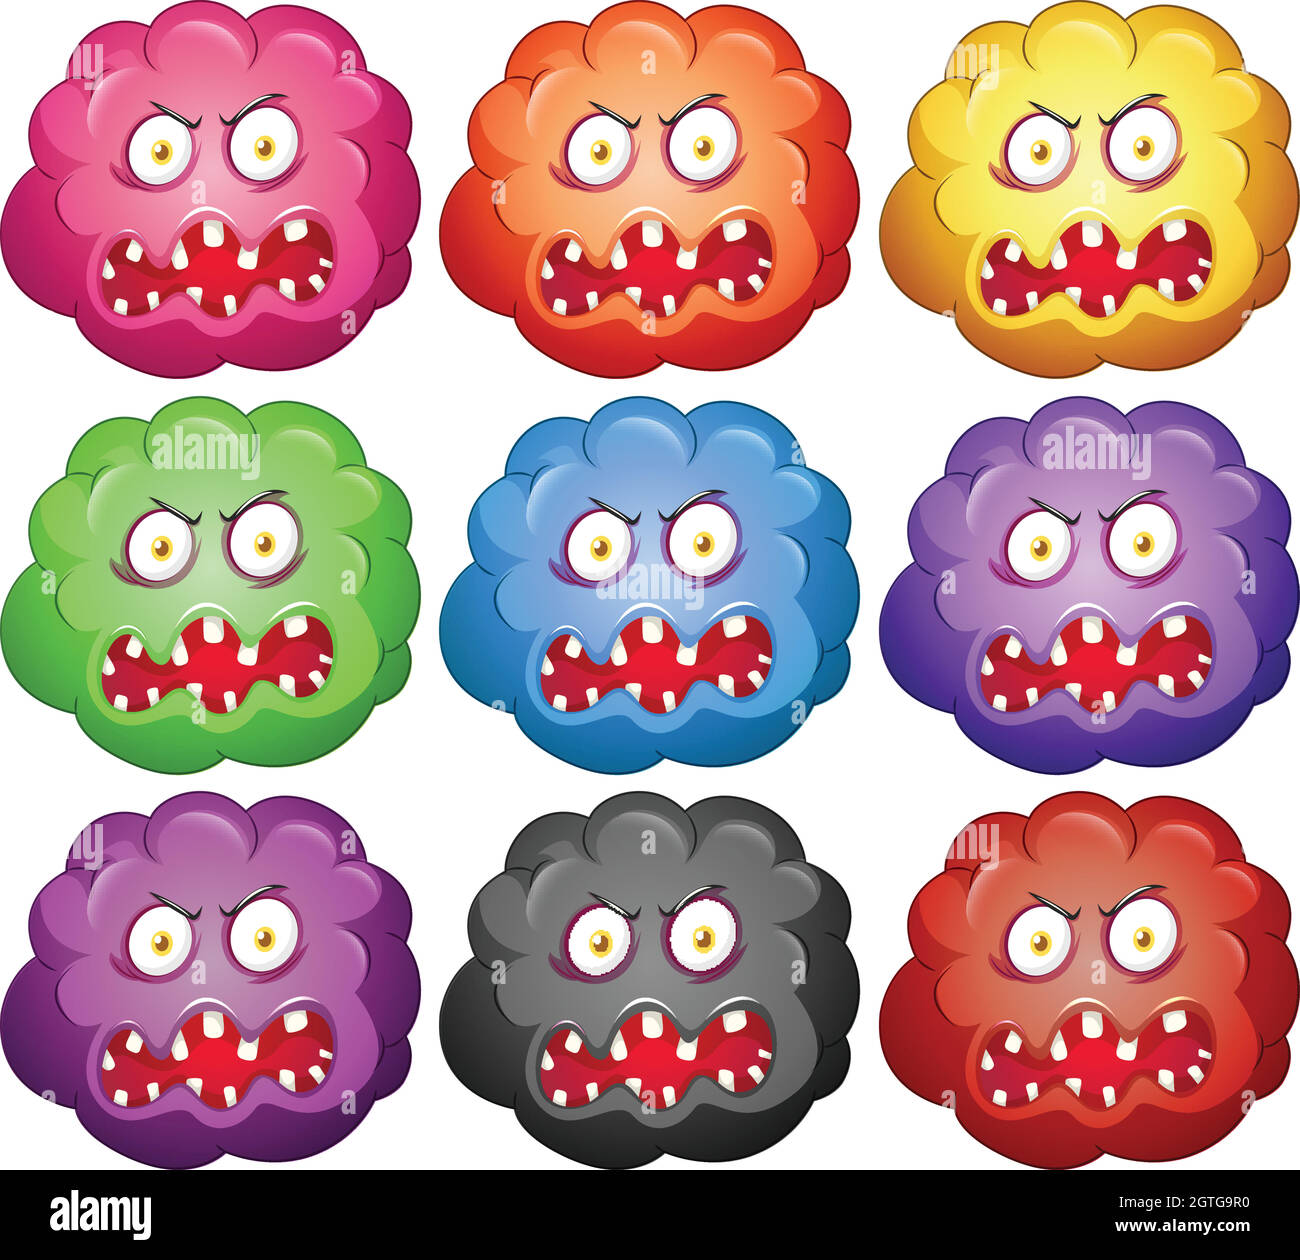 Germ with monster faces Stock Vector